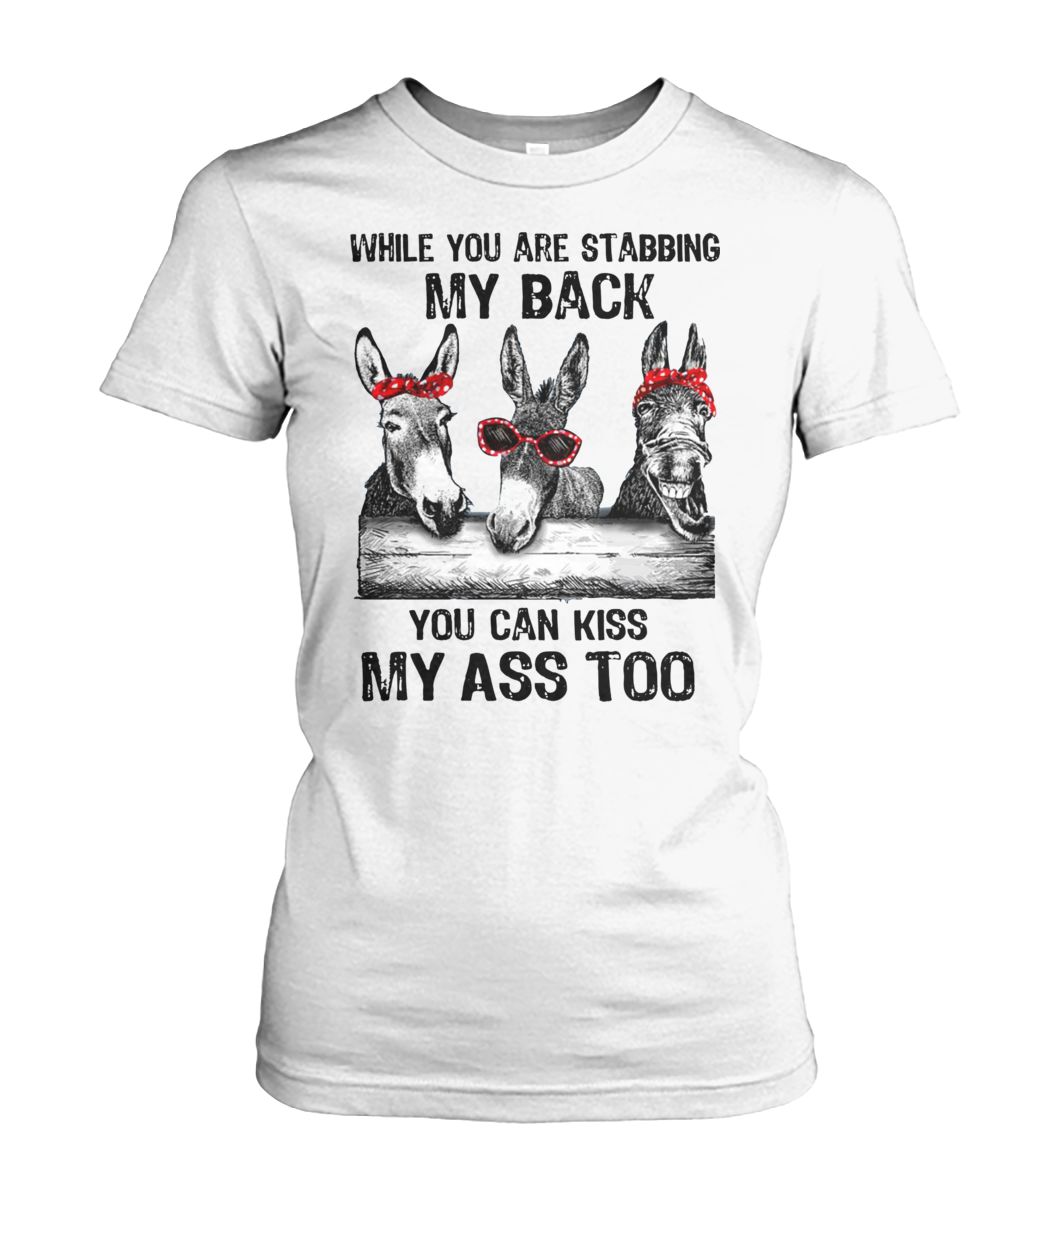 Donkey while you are stabbing my back you can kiss my ass too women's crew tee